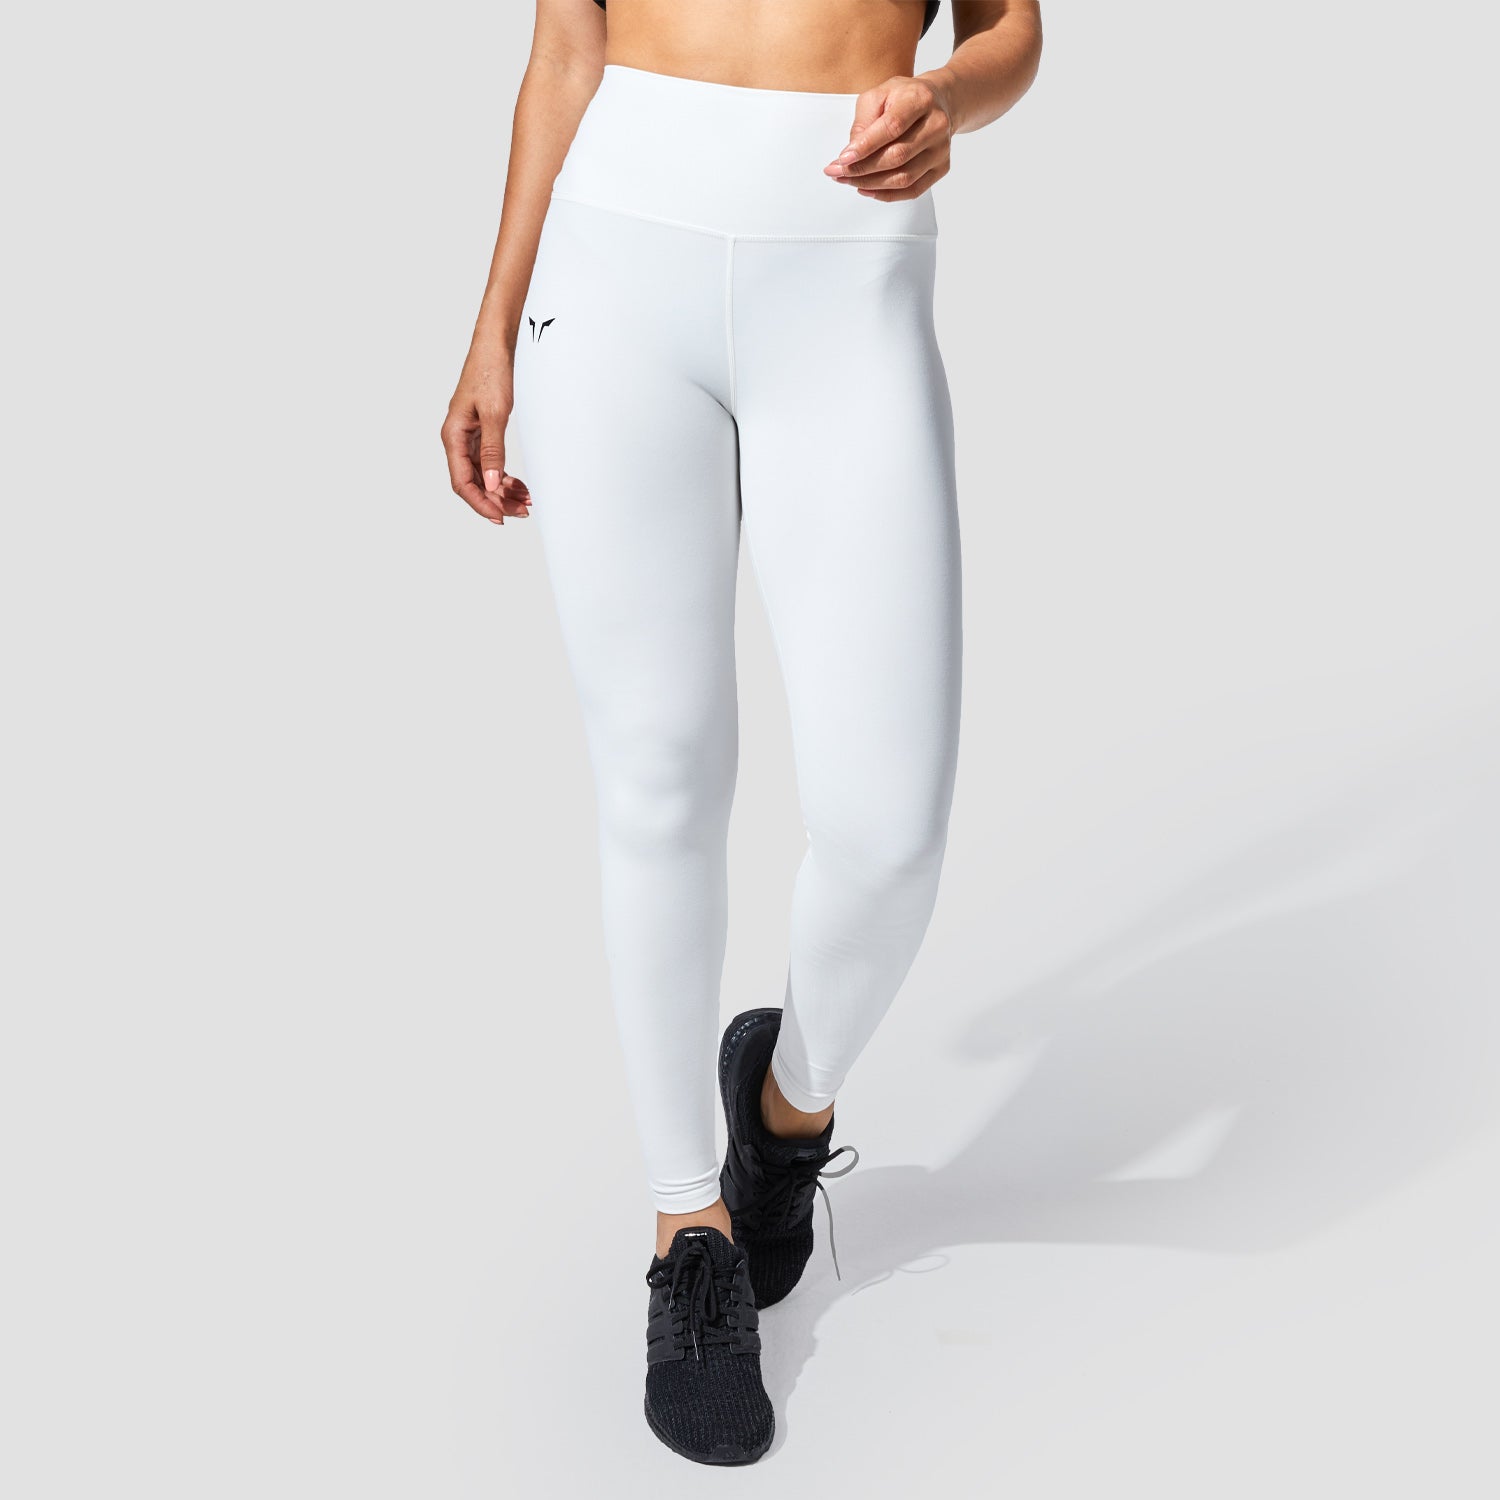 squatwolf-workout-clothes-graphic-wave-eyes-leggins-white-gym-leggings-for-women